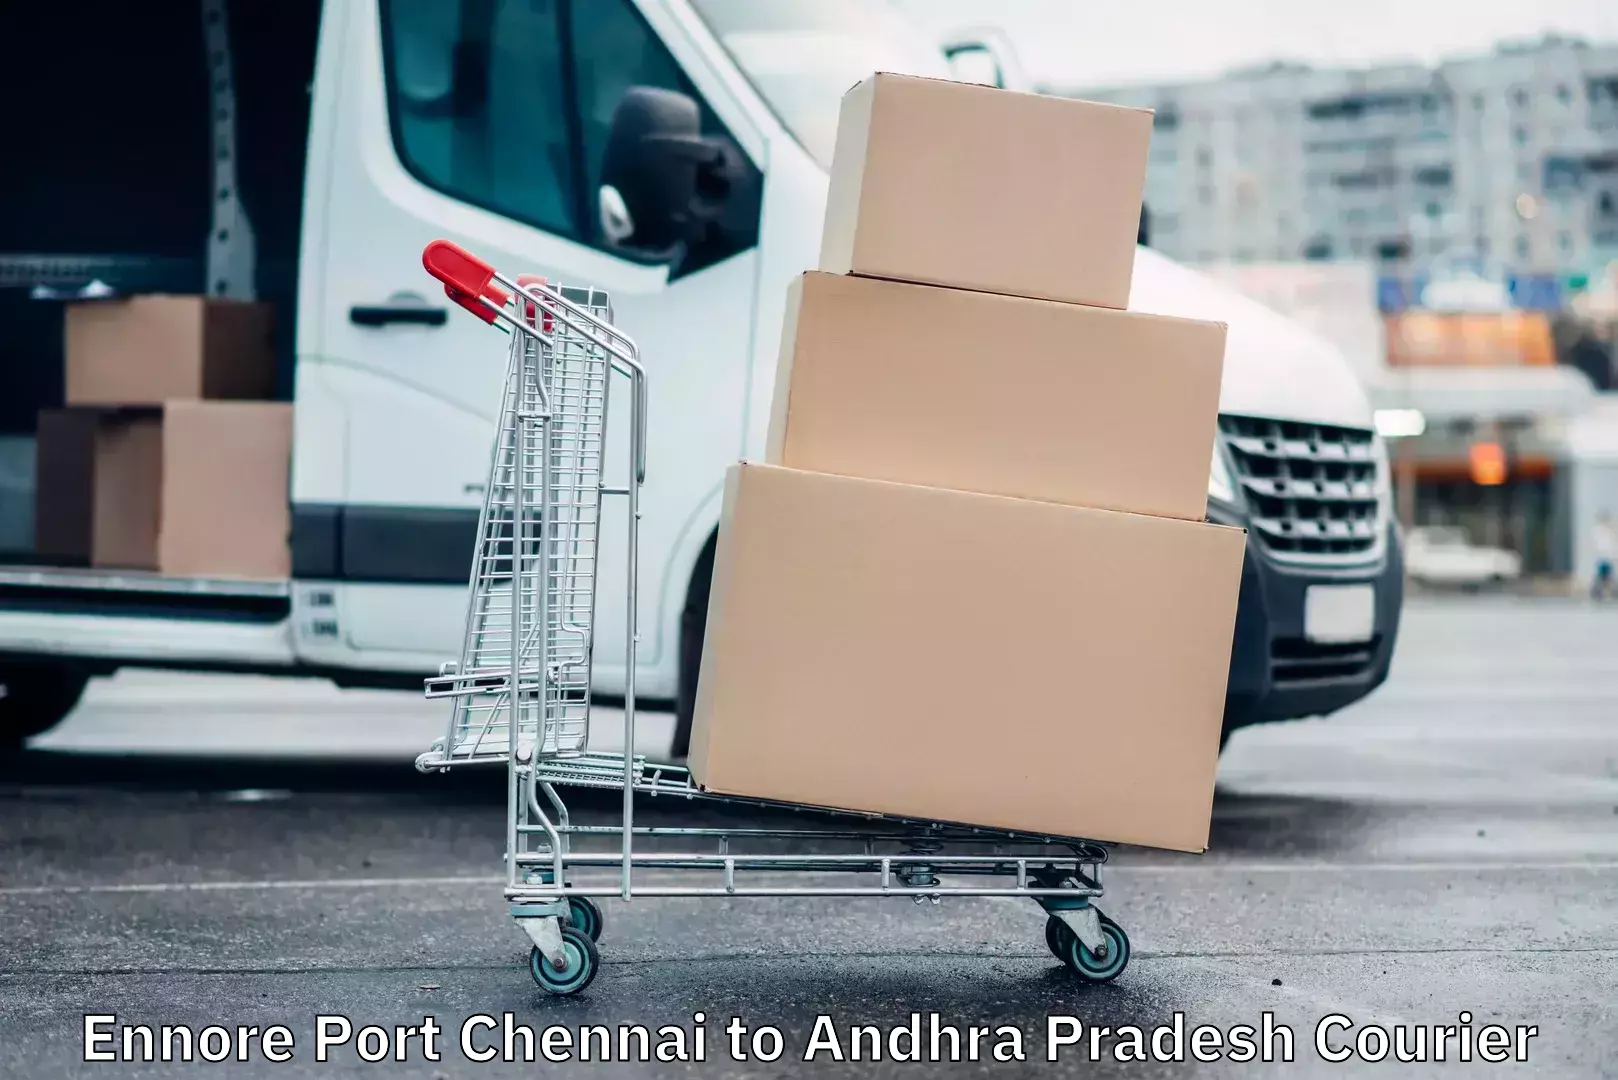 Weekend courier service Ennore Port Chennai to Andhra Pradesh